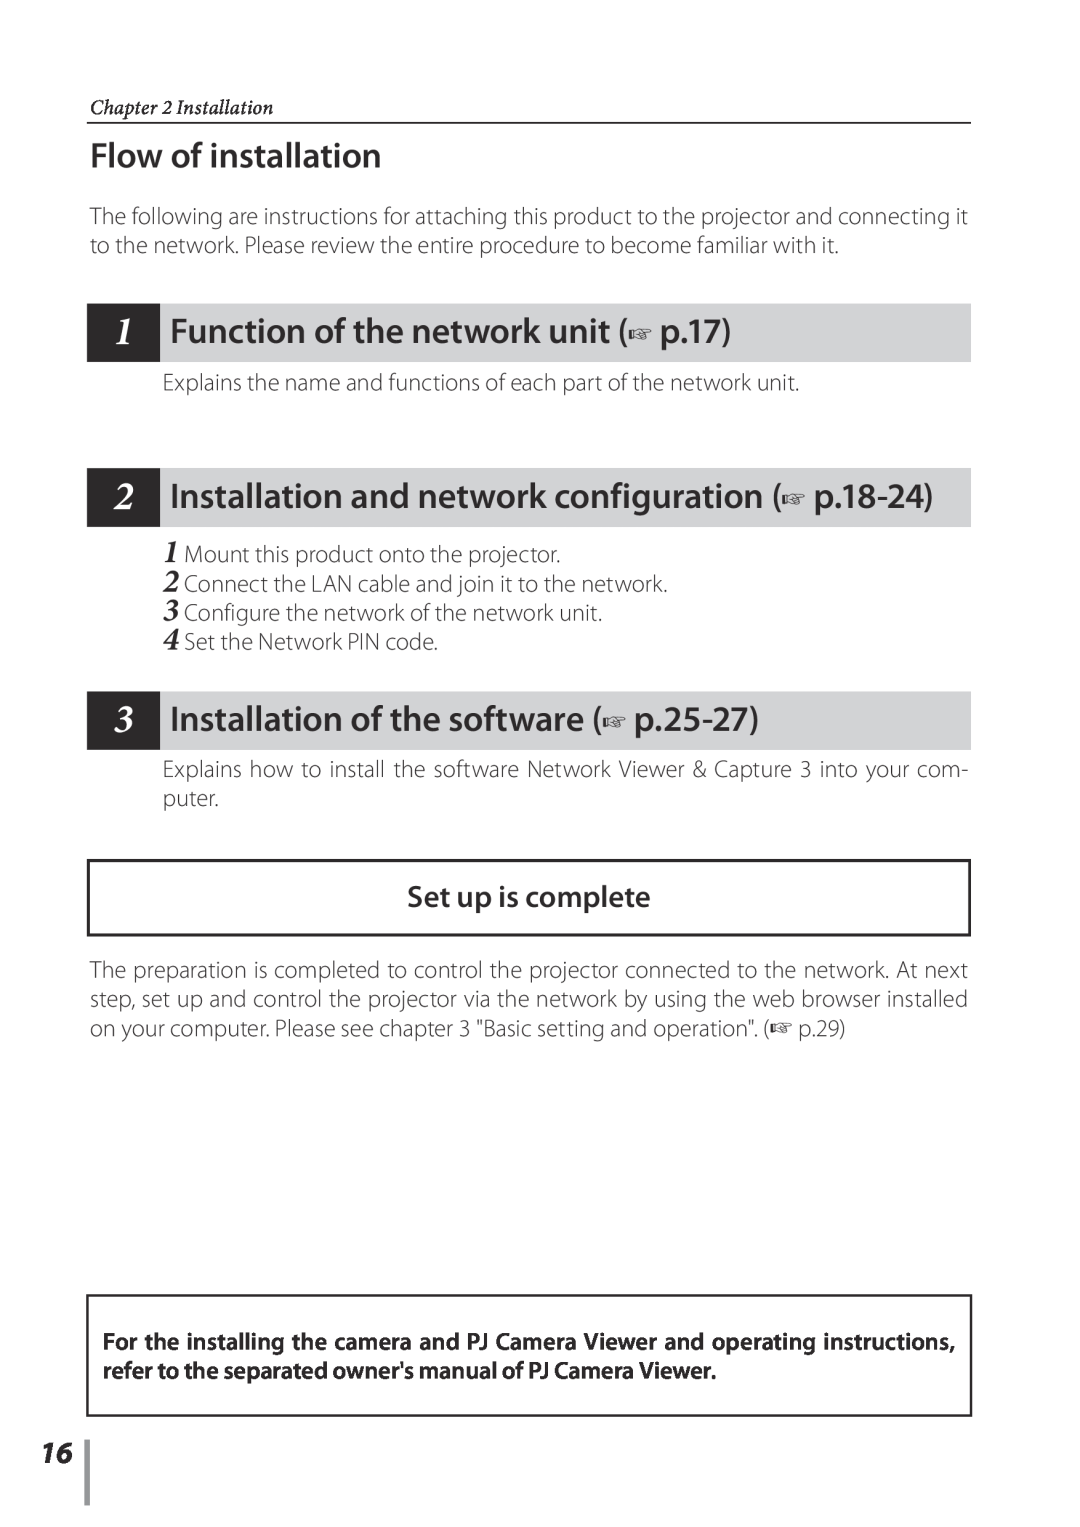 Sanyo POA-PN03C Flow of installation, 1Function of the network unit p.17, 2Installation and network configuration p.18-24 